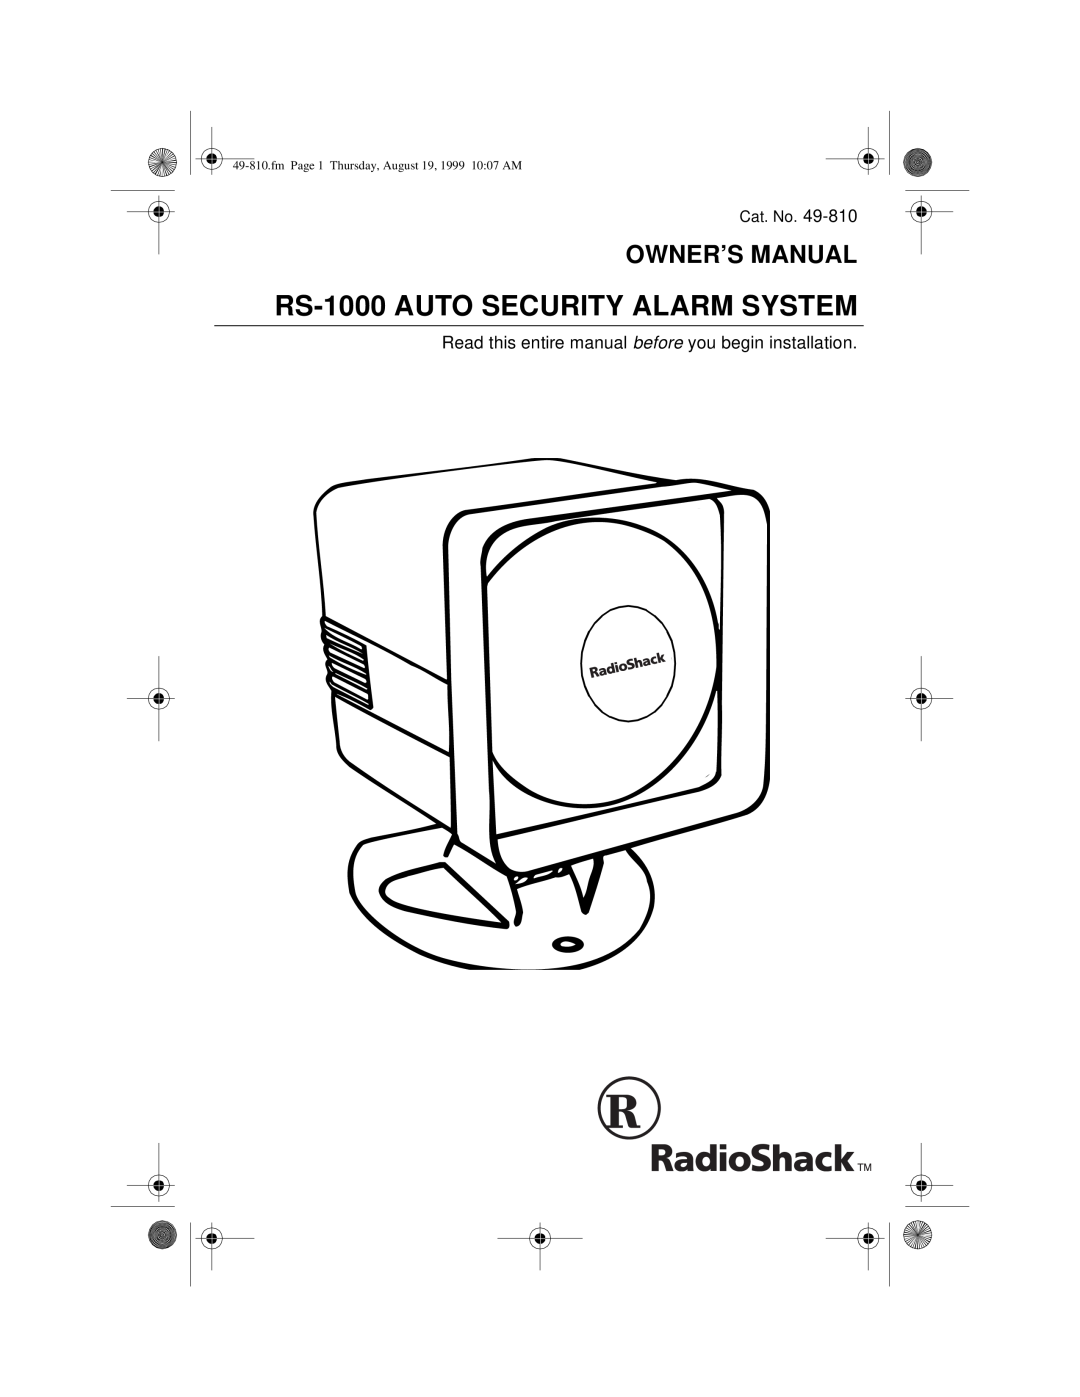 Radio Shack owner manual RS-1000AUTO SECURITY ALARM SYSTEM 